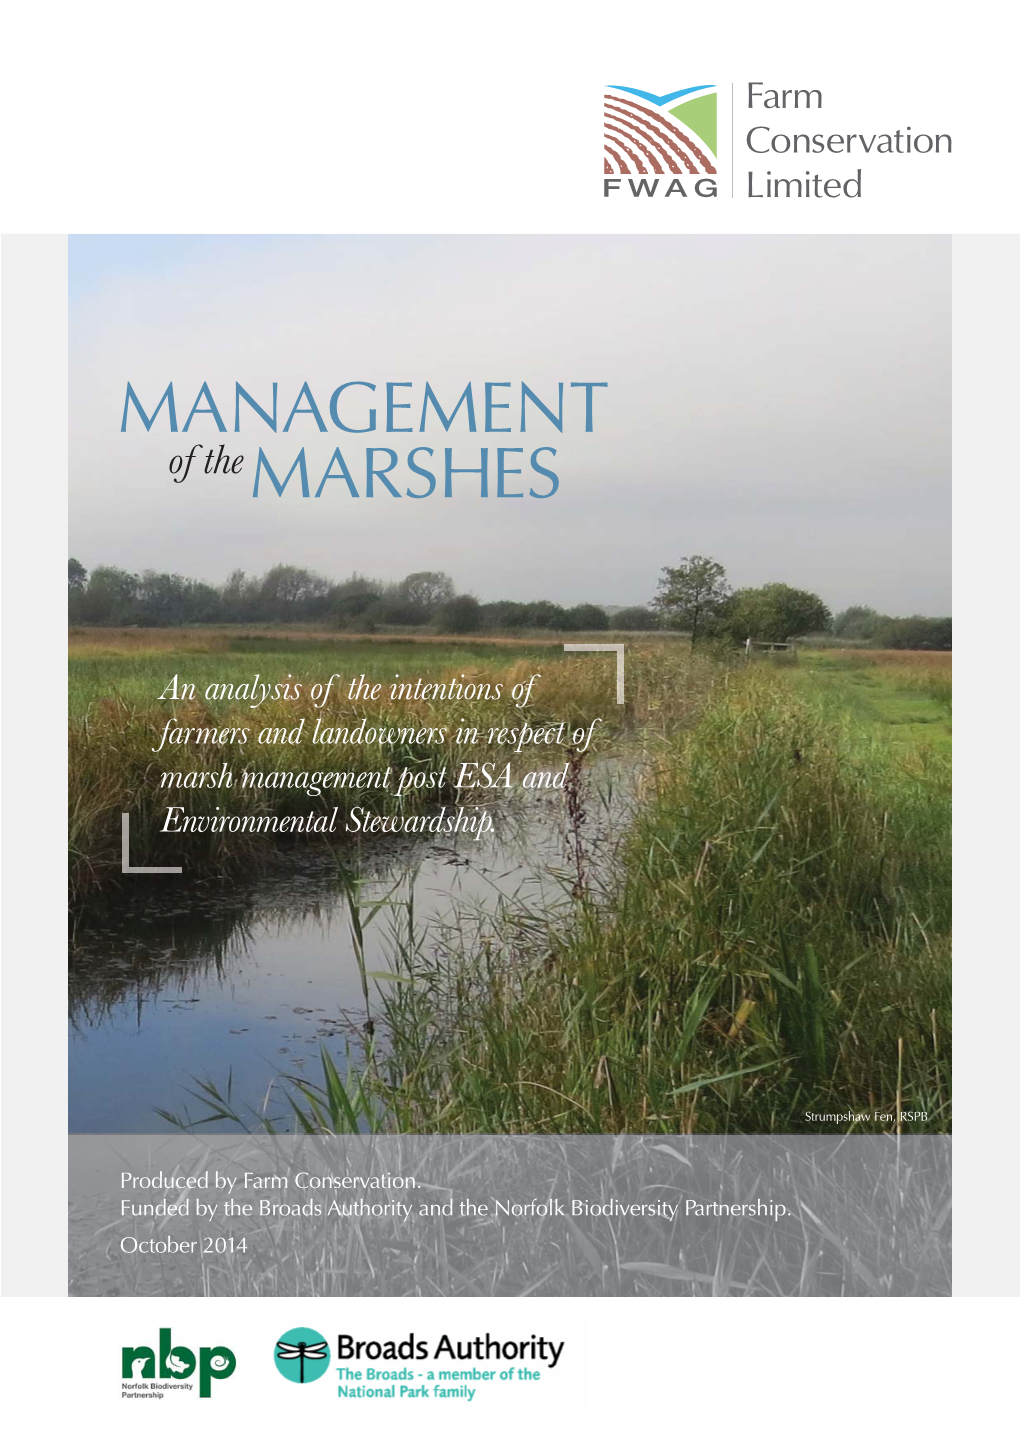 MANAGEMENT of the MARSHES